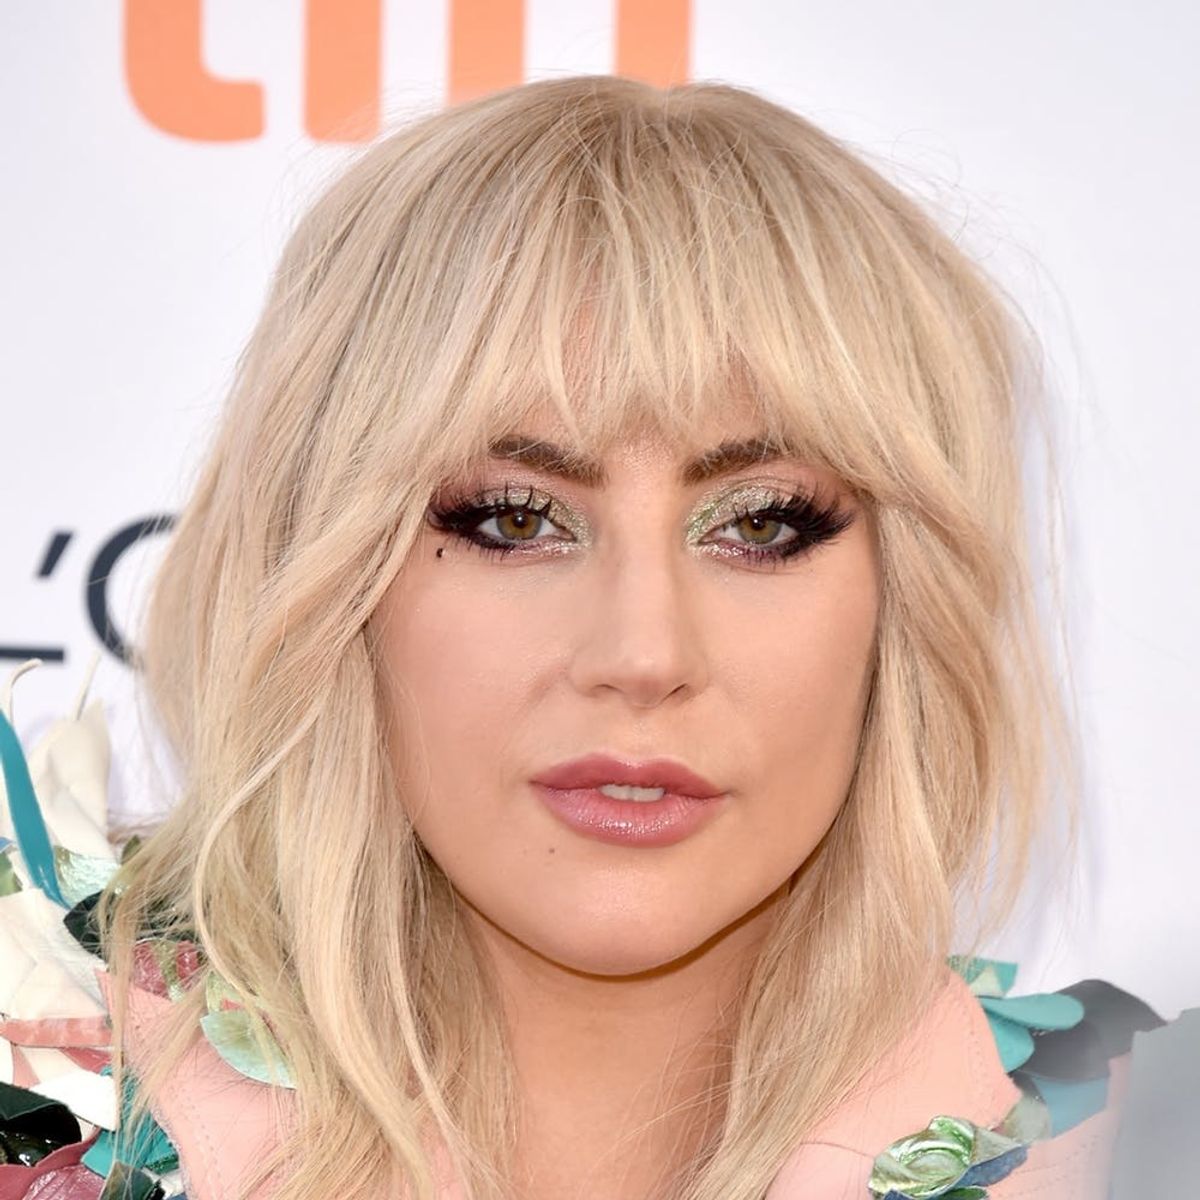 The Real Reason Lady Gaga Toned Down Her Look Will Make You Cheer